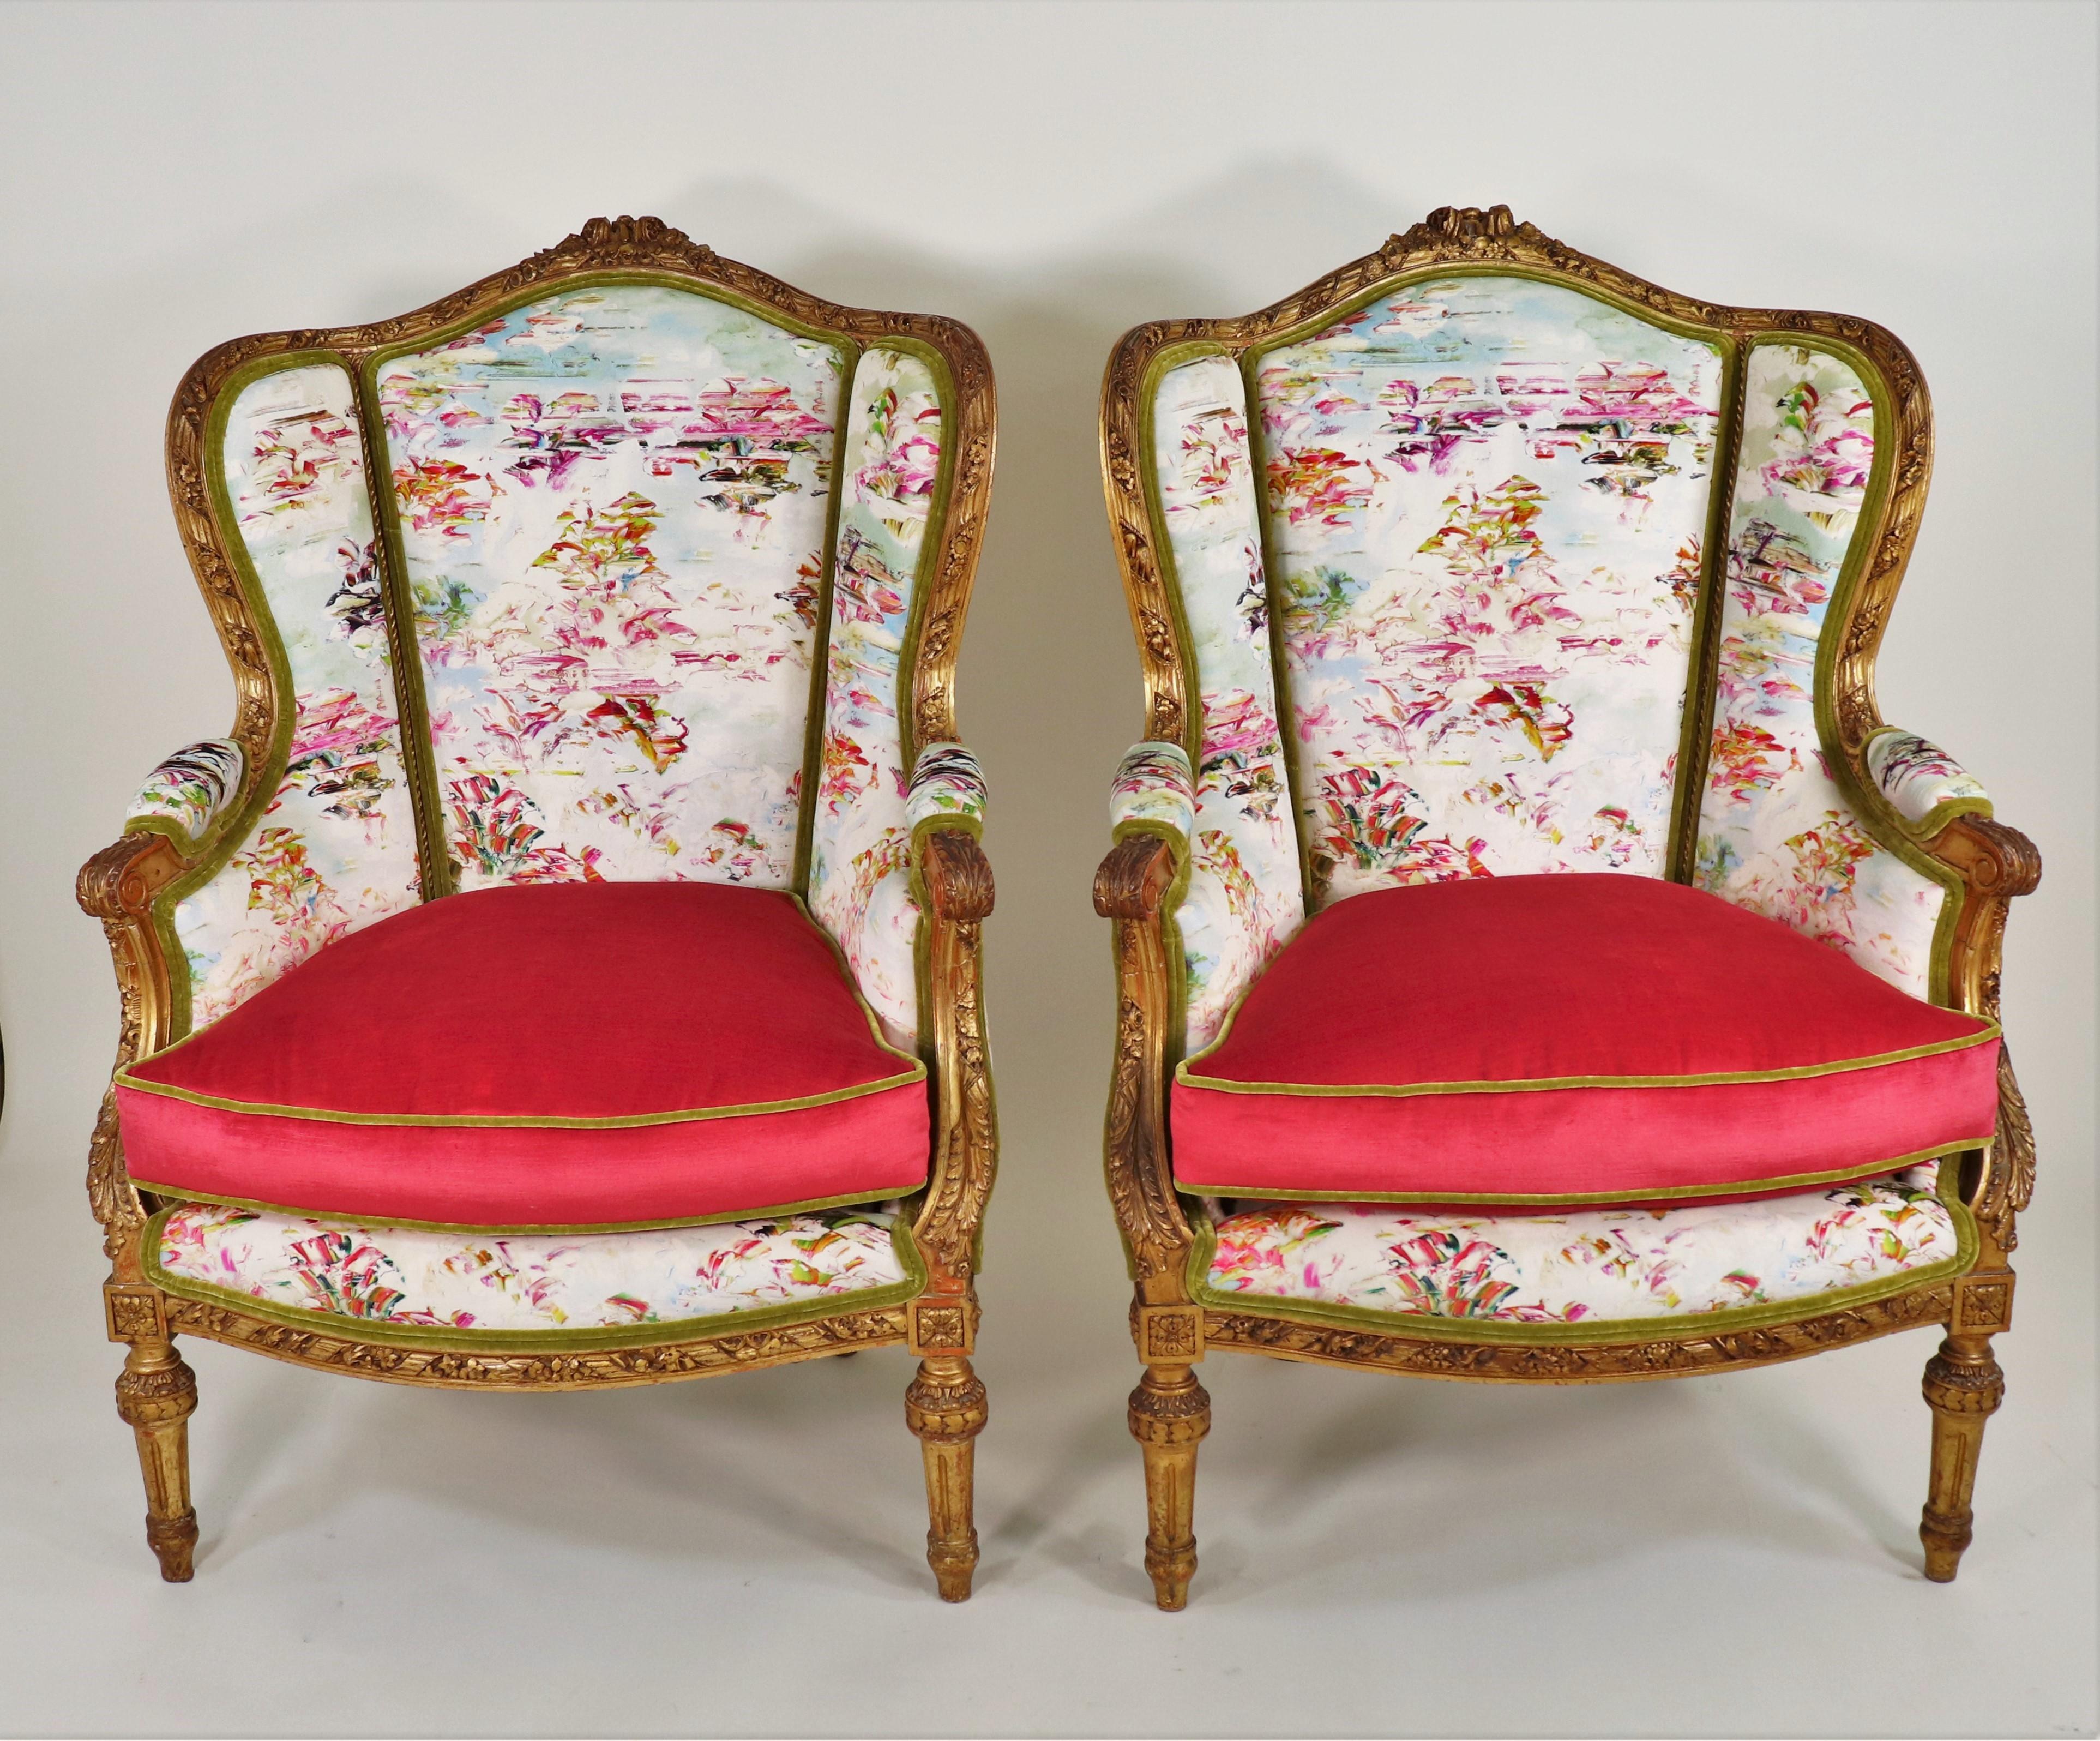 This pair of mid-19th Century French Louis XVI giltwood bergère armchairs are versatile, classic, and comfortable. During the second half of the 18th century, French furniture underwent a neoclassical revision away from the twirled, freehand designs